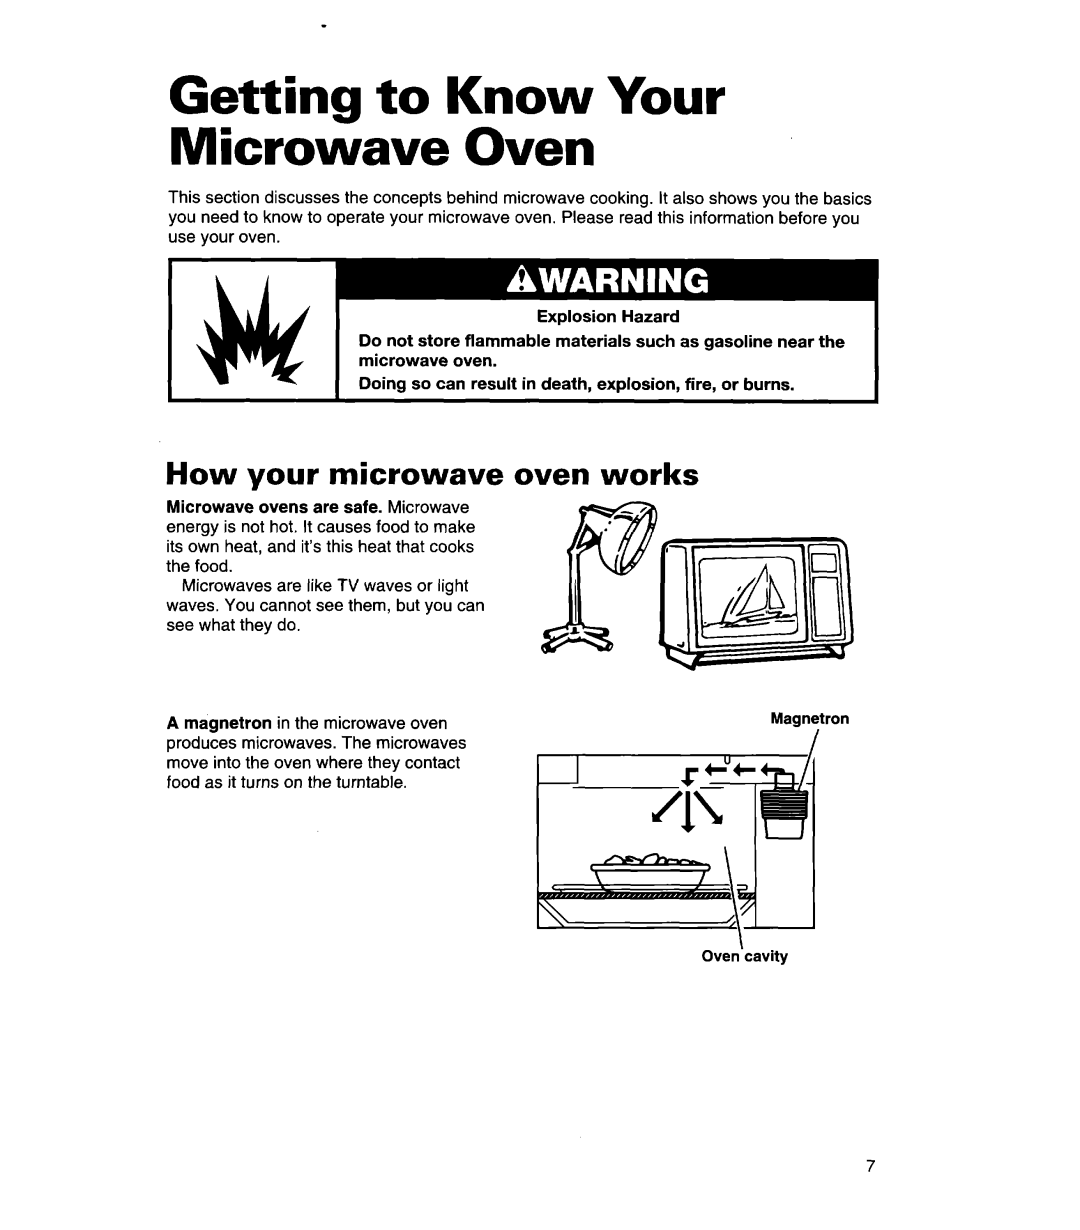 Whirlpool MH7130XE Getting to Know Your Microwave Oven, How your microwave oven works, Explosion Hazard, Magnetron I 